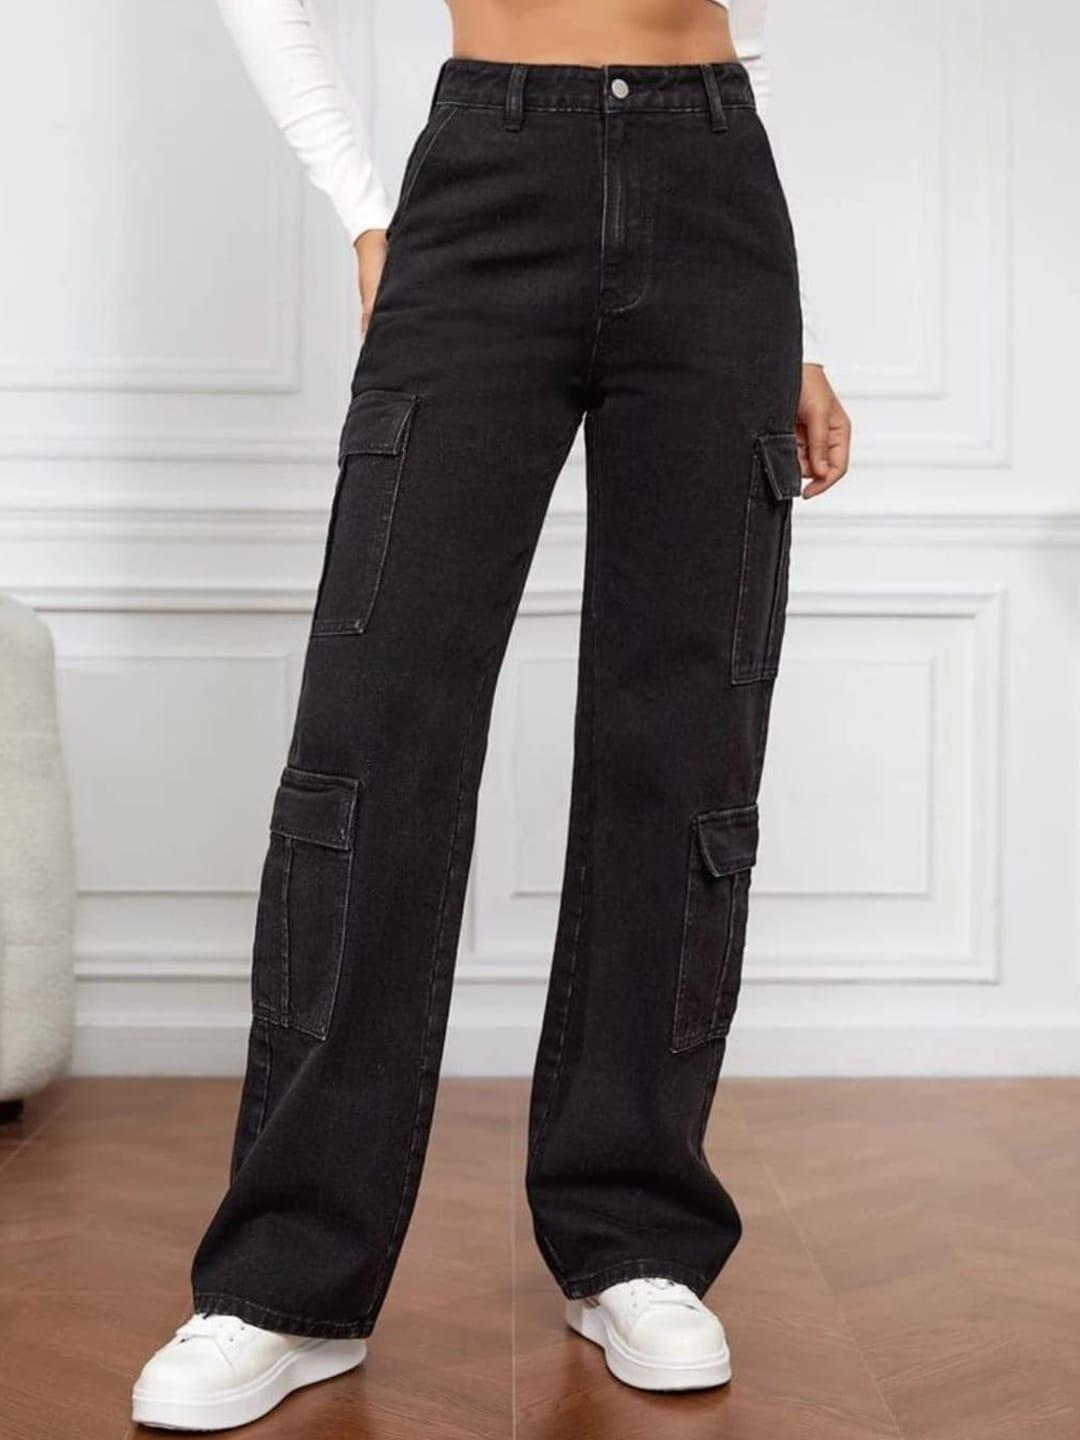 next-one-women-smart-clean-look-high-rise-wide-leg-stretchable-jeans